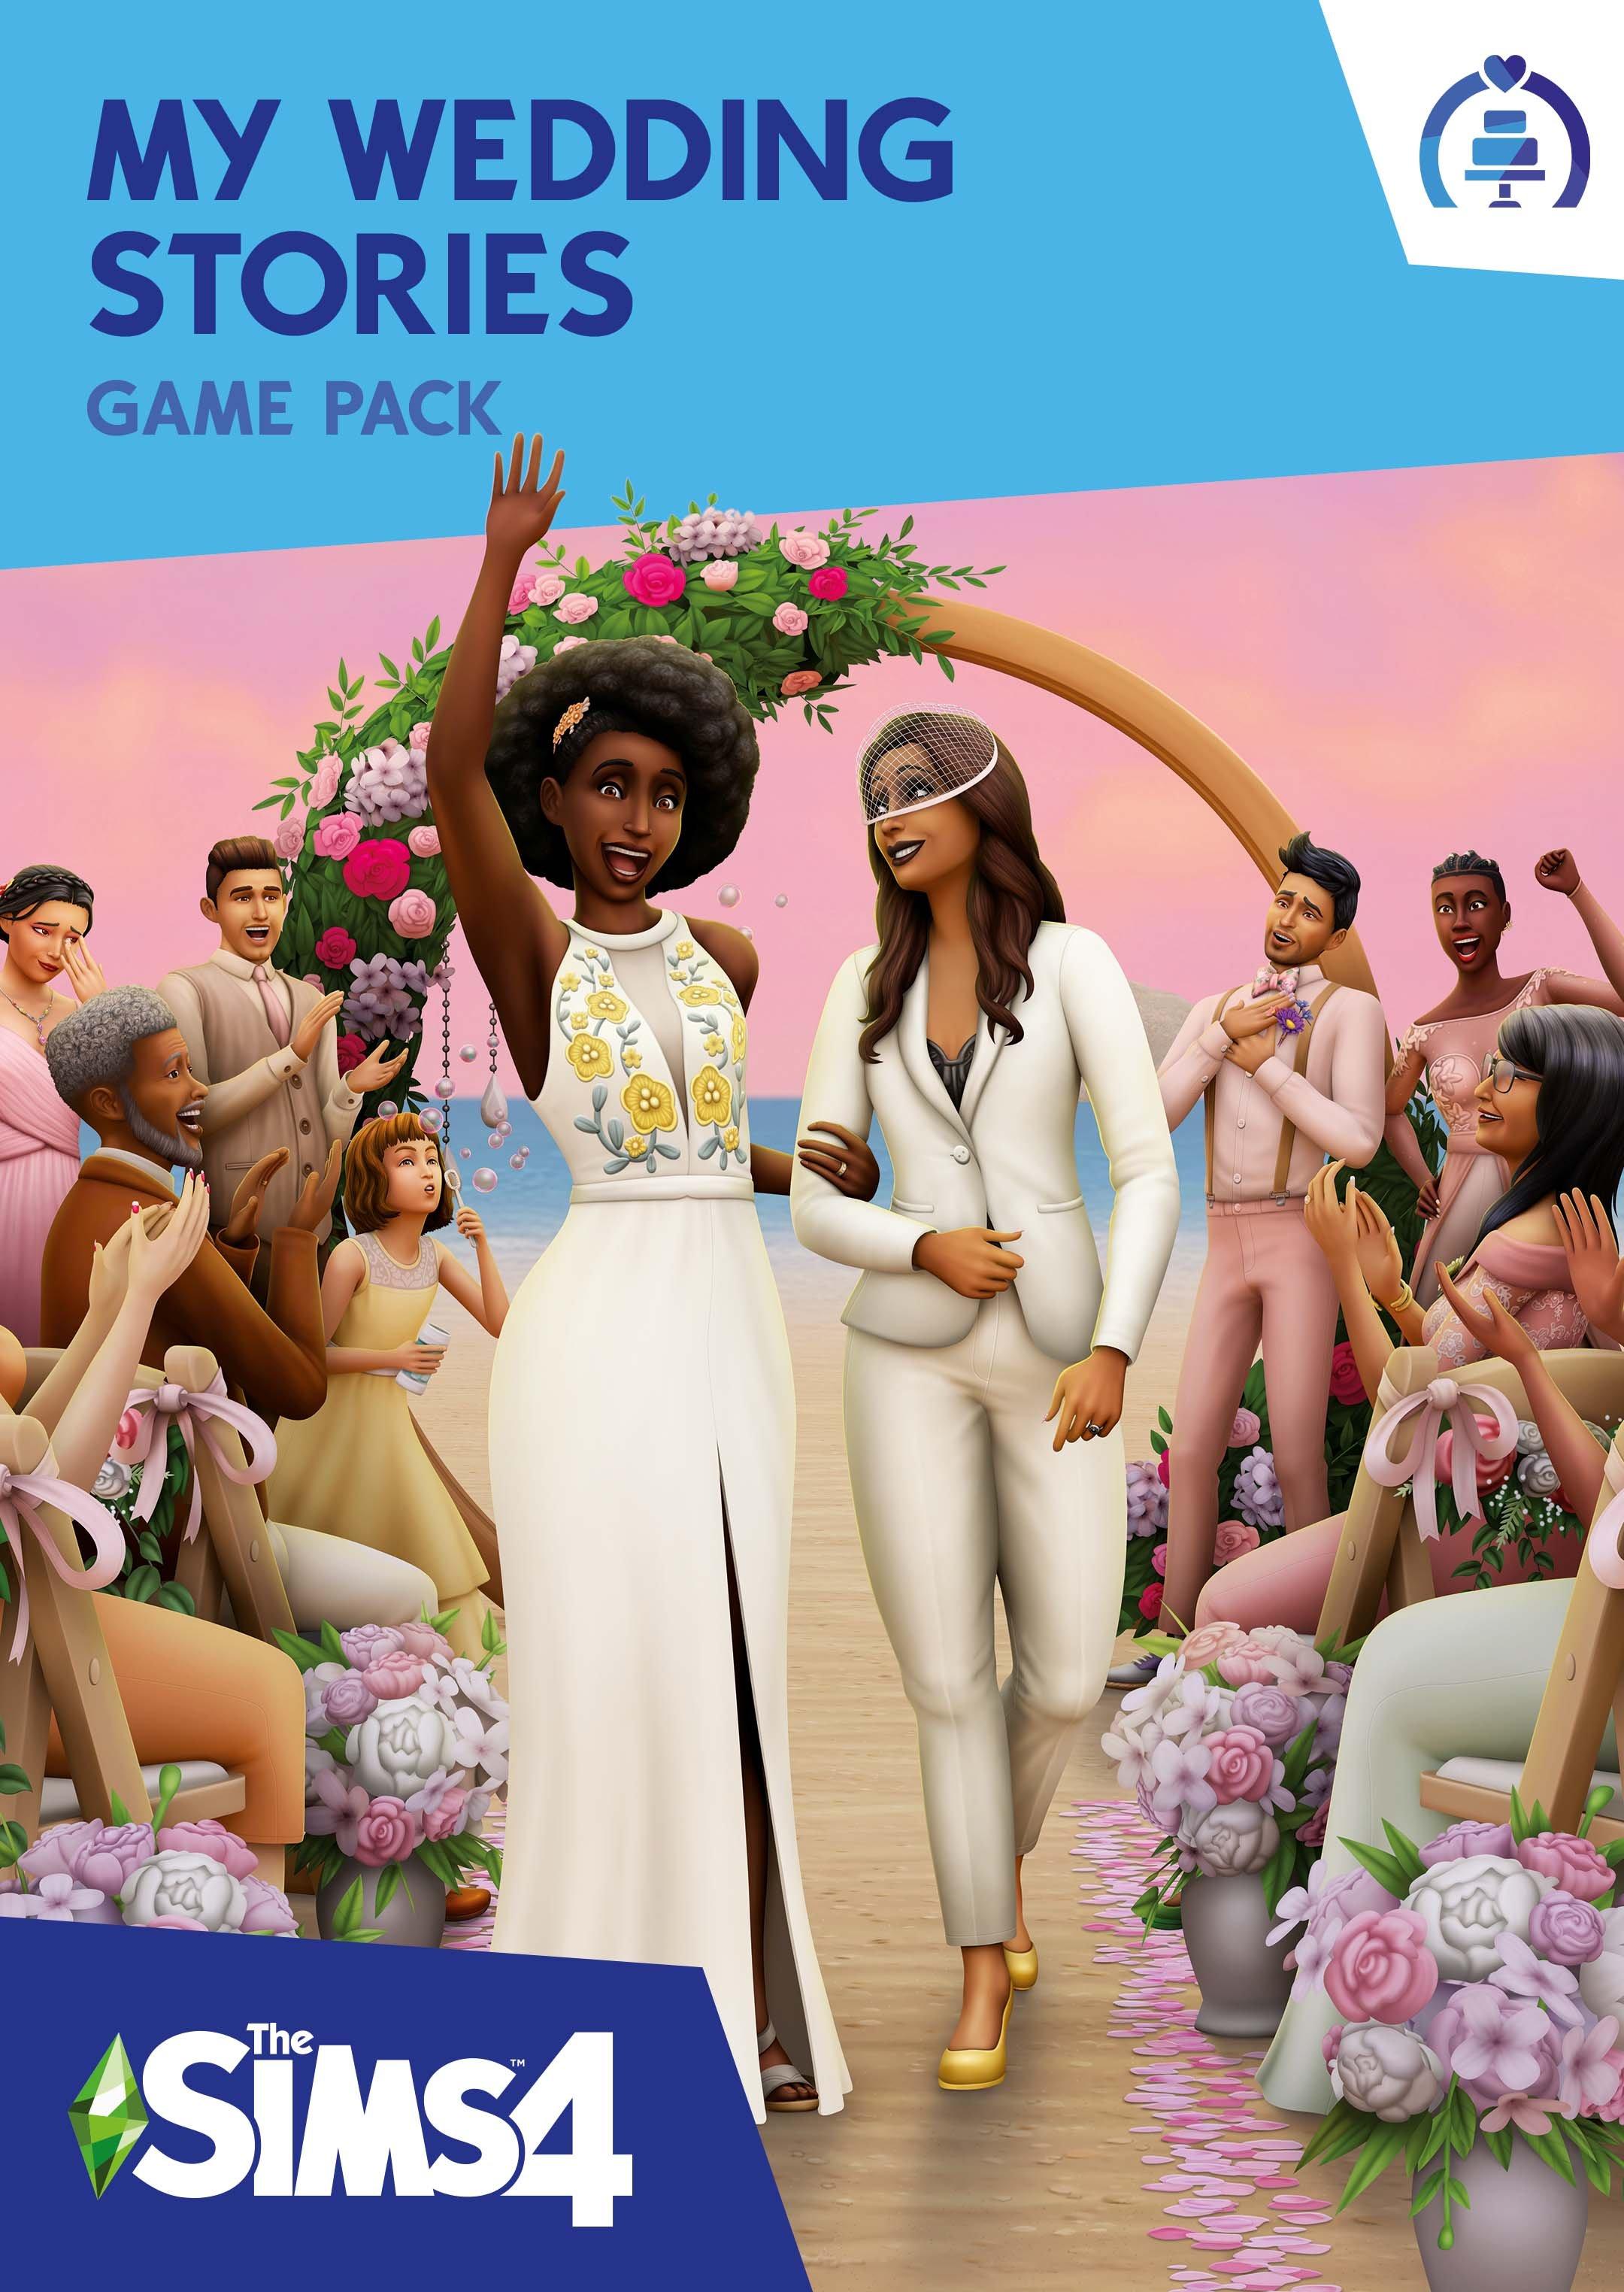 New Sims 4 My Wedding Stories Game Pack Now Available - CNET